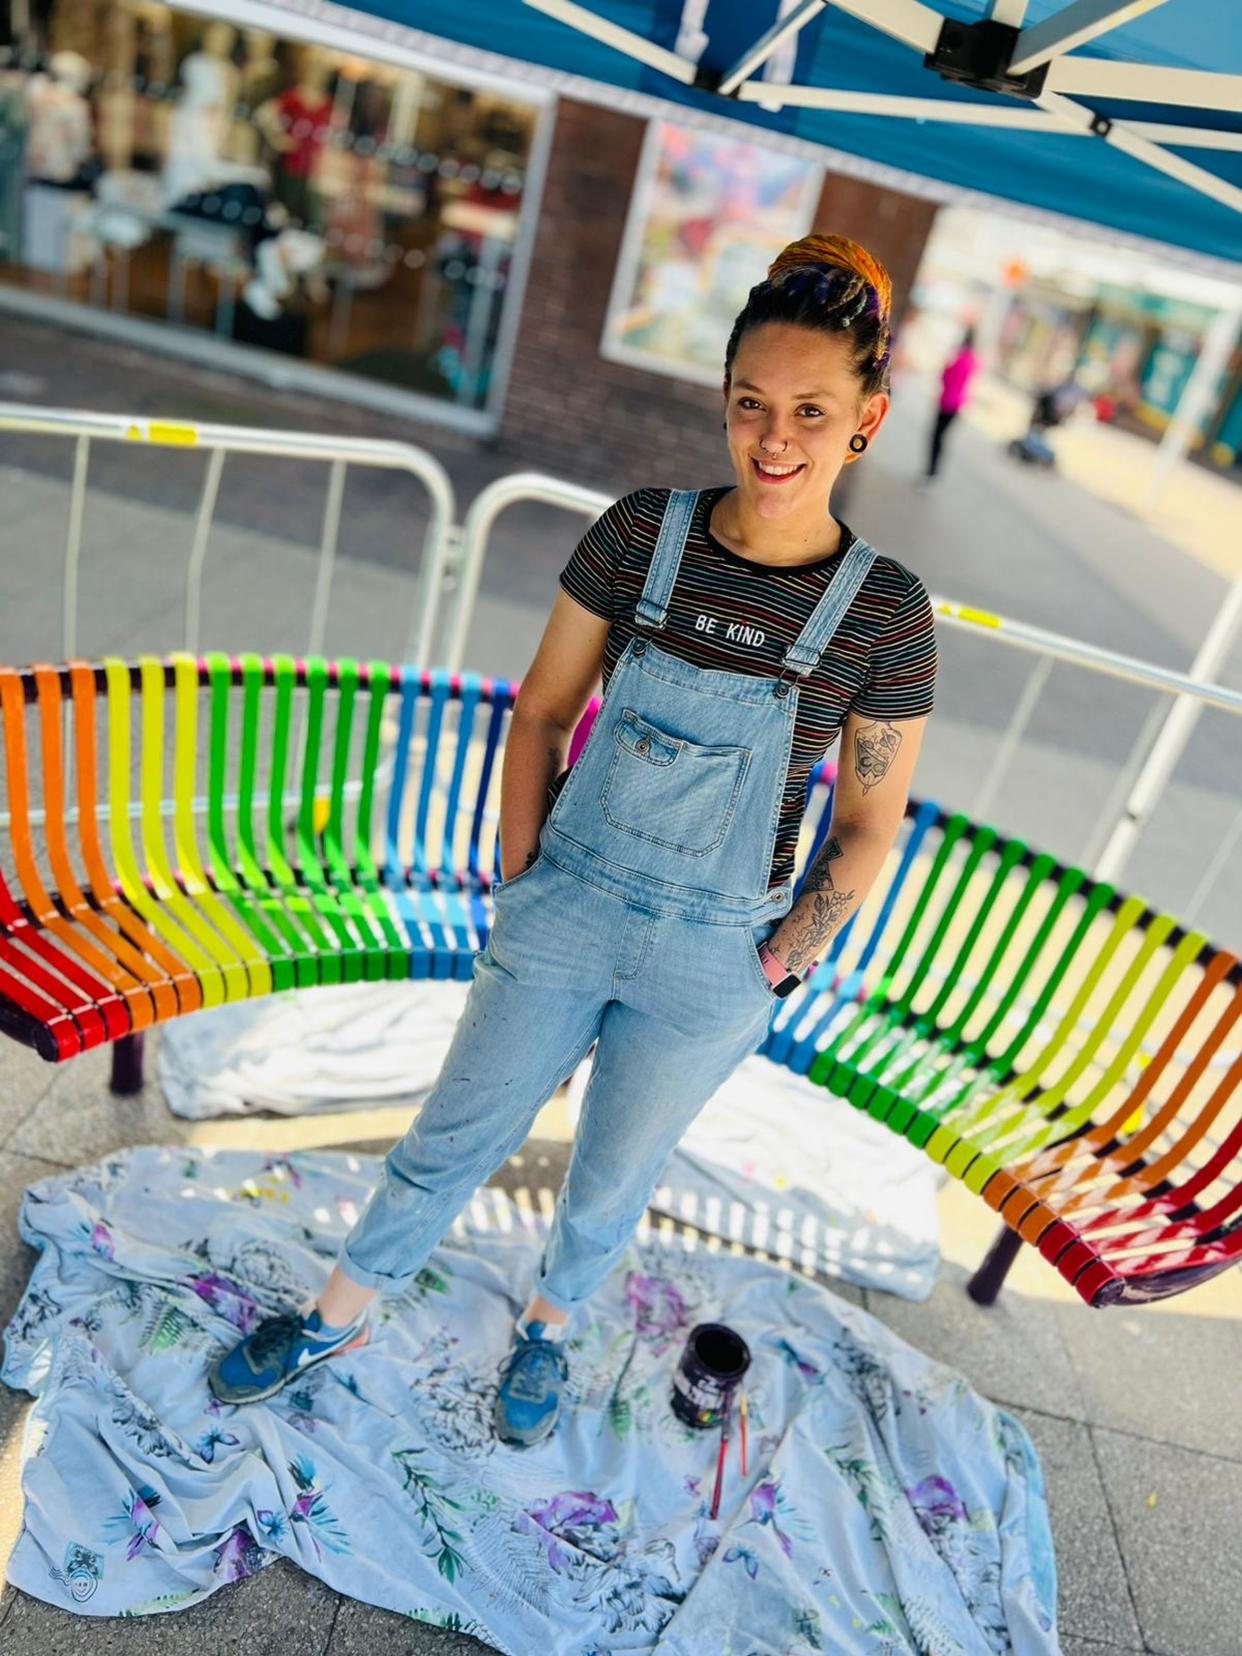 PIC FROM KENNEDY NEWS/ADAM FRAY (PICTURED: FREELANCE ARTIST HANNAH WALTON, 25, WHO PAINTED THE BENCHES STOOD IN FRONT OF ONE) Furious shoppers have branded a shopping centre's rainbow-coloured benches 'woke' - and are even threatening to paint them black. Longton Exchange Shopping Centre in Stoke-on-Trent unveiled two rainbow-coloured 'buddy' benches in May in a bid to combat loneliness. Shoppers are encouraged to take a seat on one of the 'Buddy Benches' to show they either need a chat or are open to having a conversation with someone else. DISCLAIMER: While Kennedy News and Media uses its best endeavours to establish the copyright and authenticity of all pictures supplied, it accepts no liability for any damage, loss or legal action caused by the use of images supplied and the publication of images is solely at your discretion. SEE KENNEDY NEWS COPY - 0161 697 4266